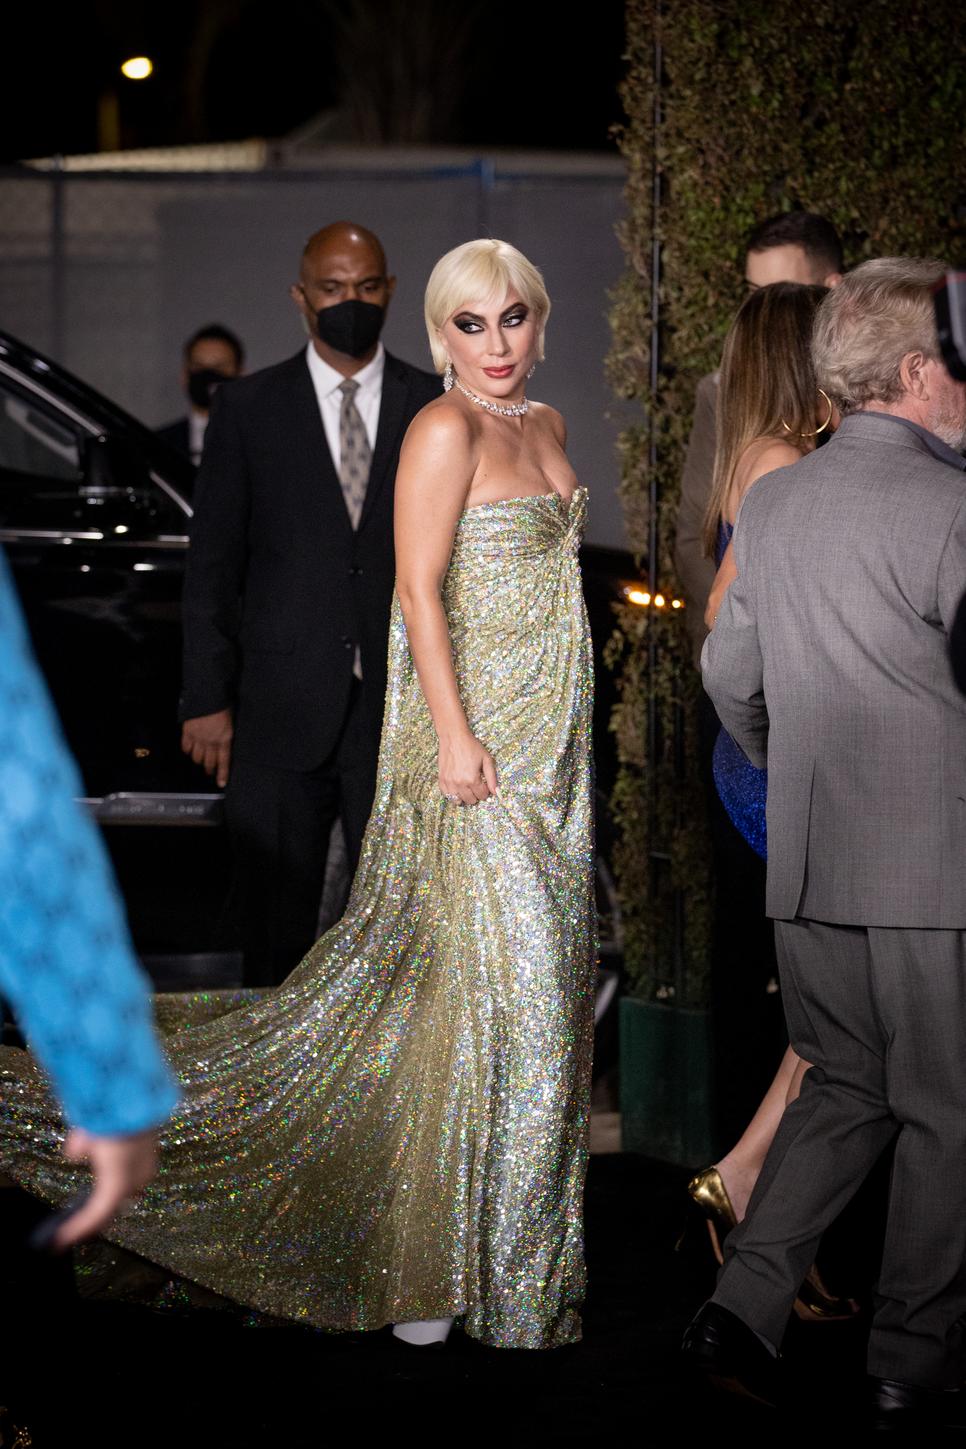 What a transformation!  Lady Gaga arrives at the premiere of The Gucci House with super short hair and extra makeup